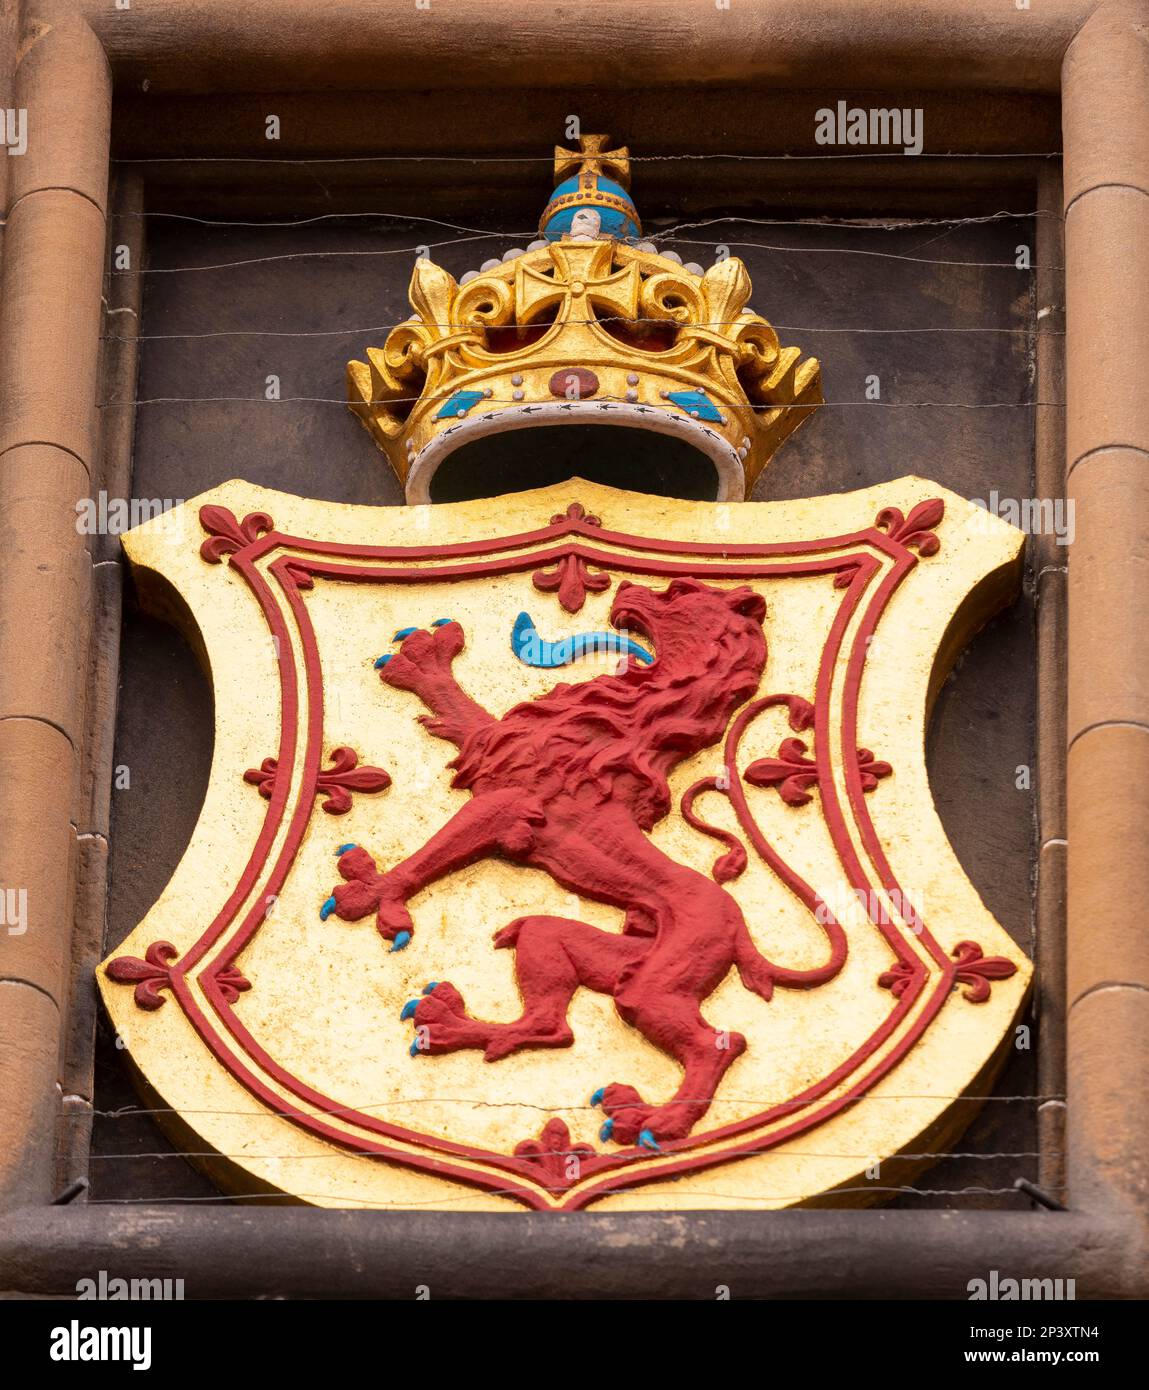 EDINBURGH, SCOTLAND, EUROPE - Royal Coat of Arms at entrance to Edinburgh Castle. Includes The Lion Rampant and the royal crown of Scotland. Stock Photo